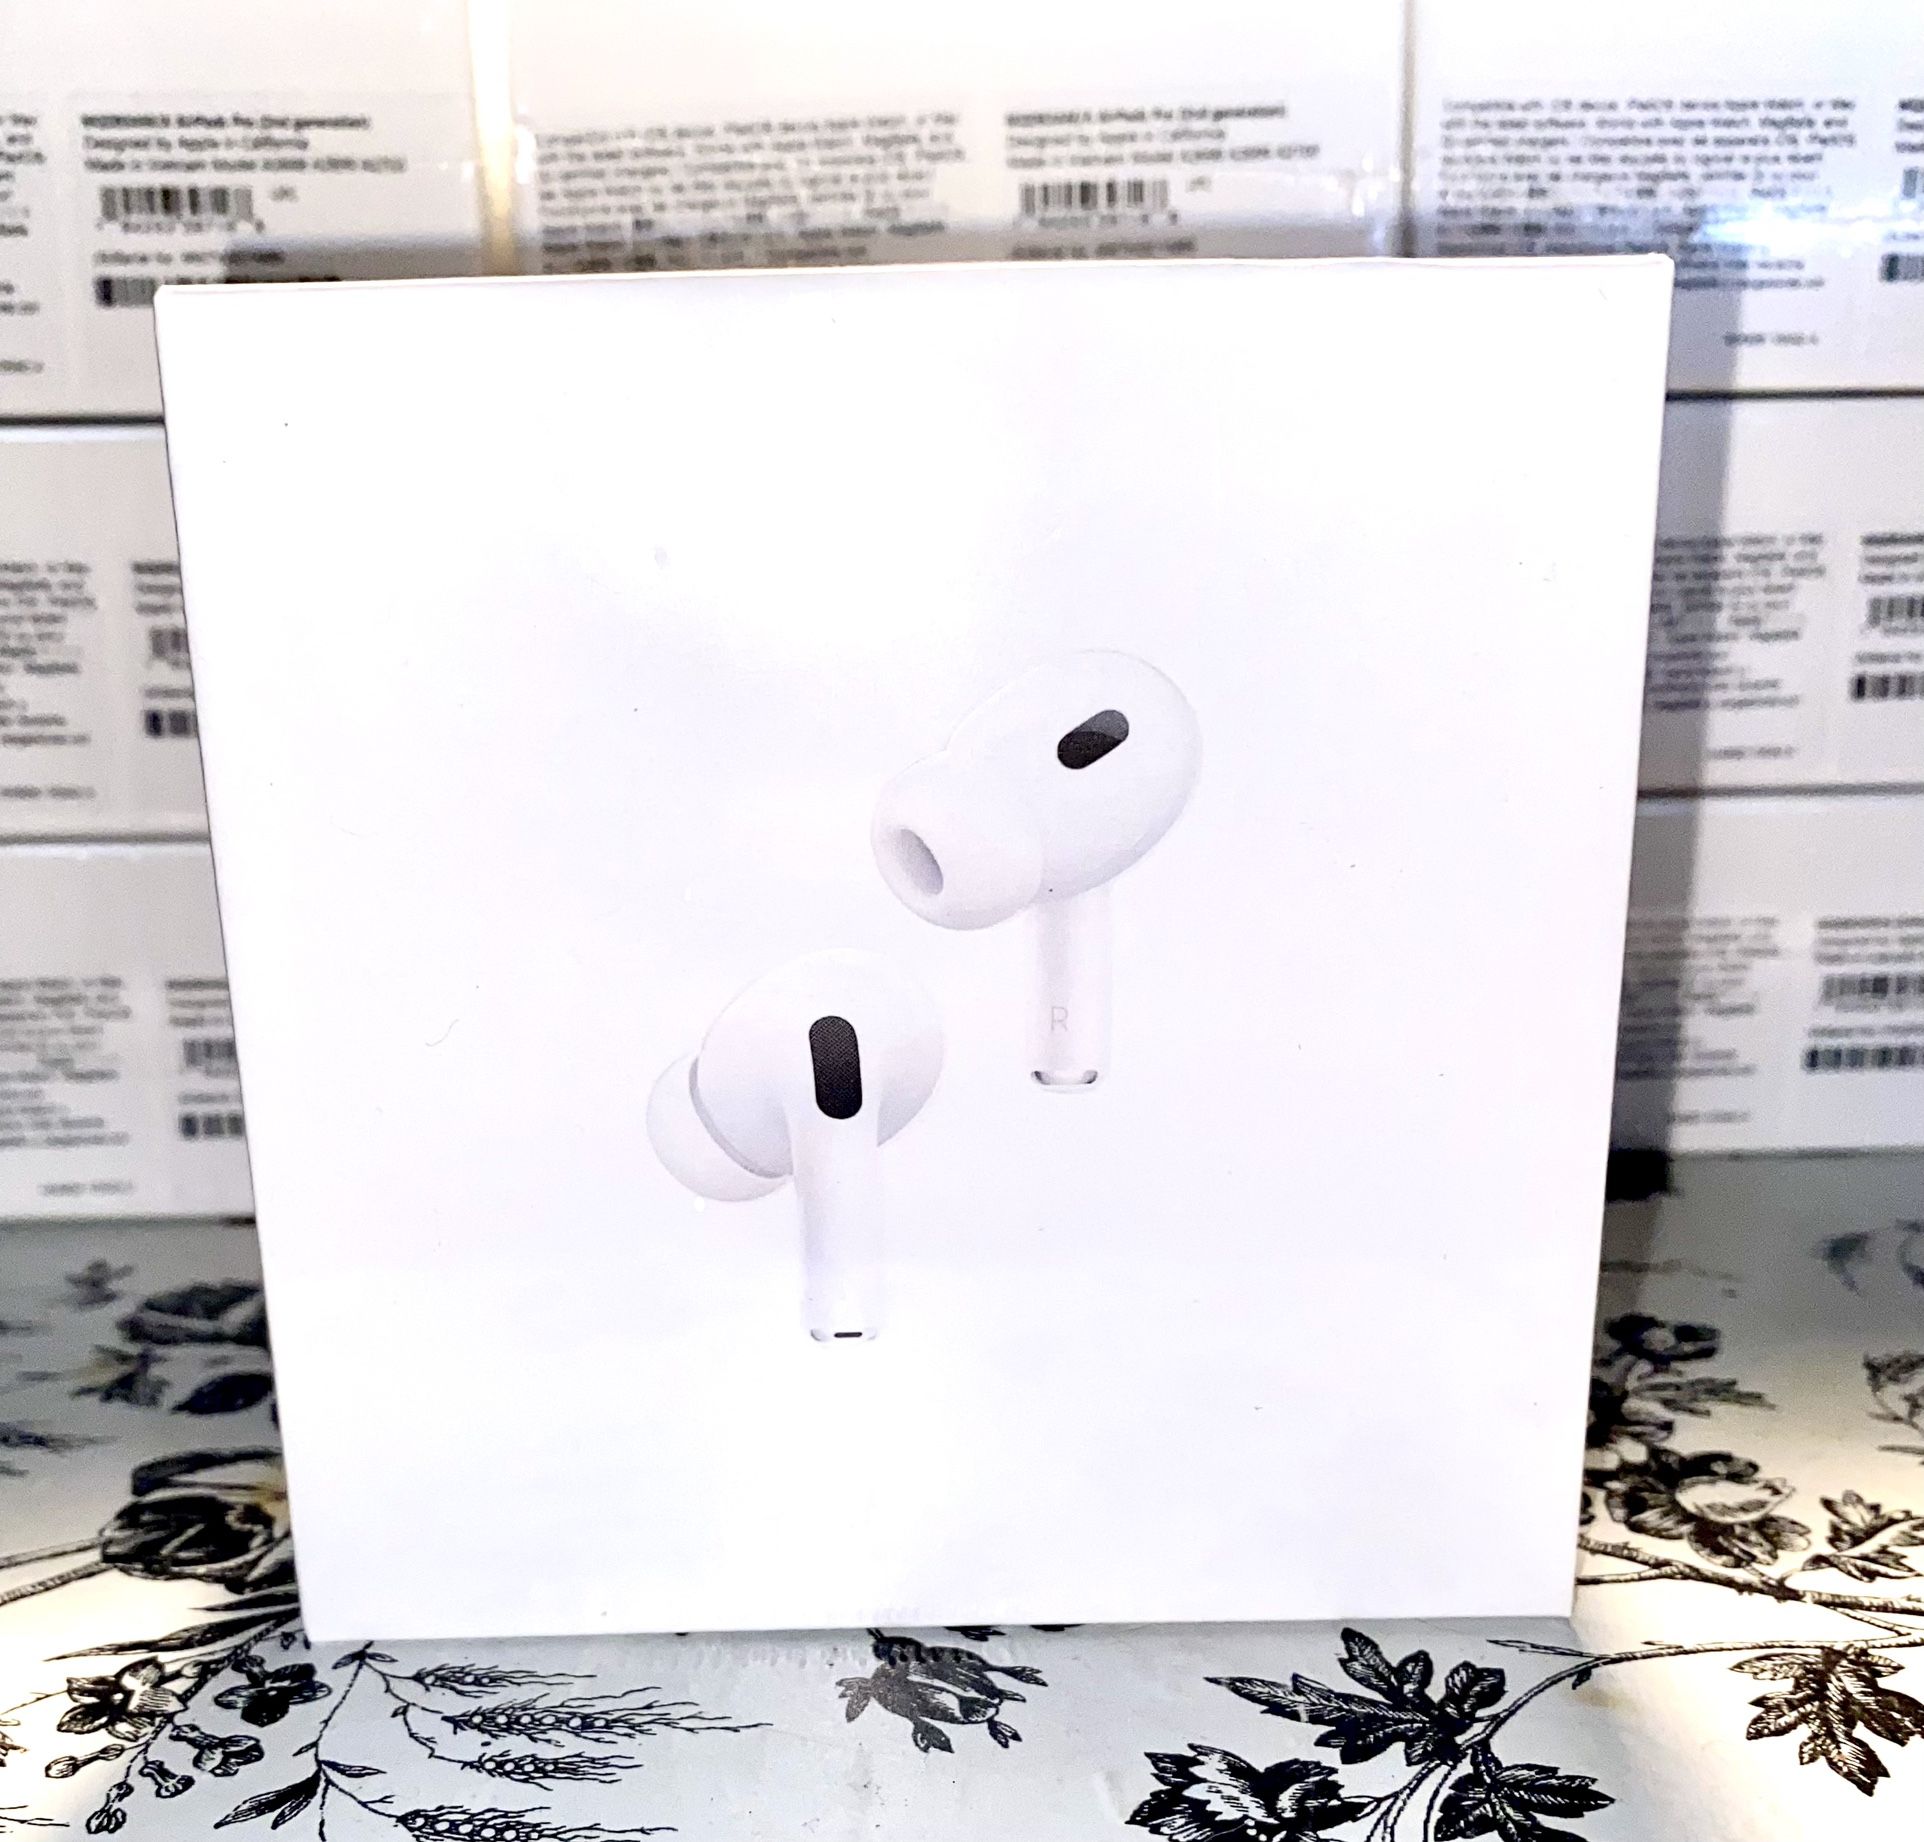 Used-like New AirPods For Sale 